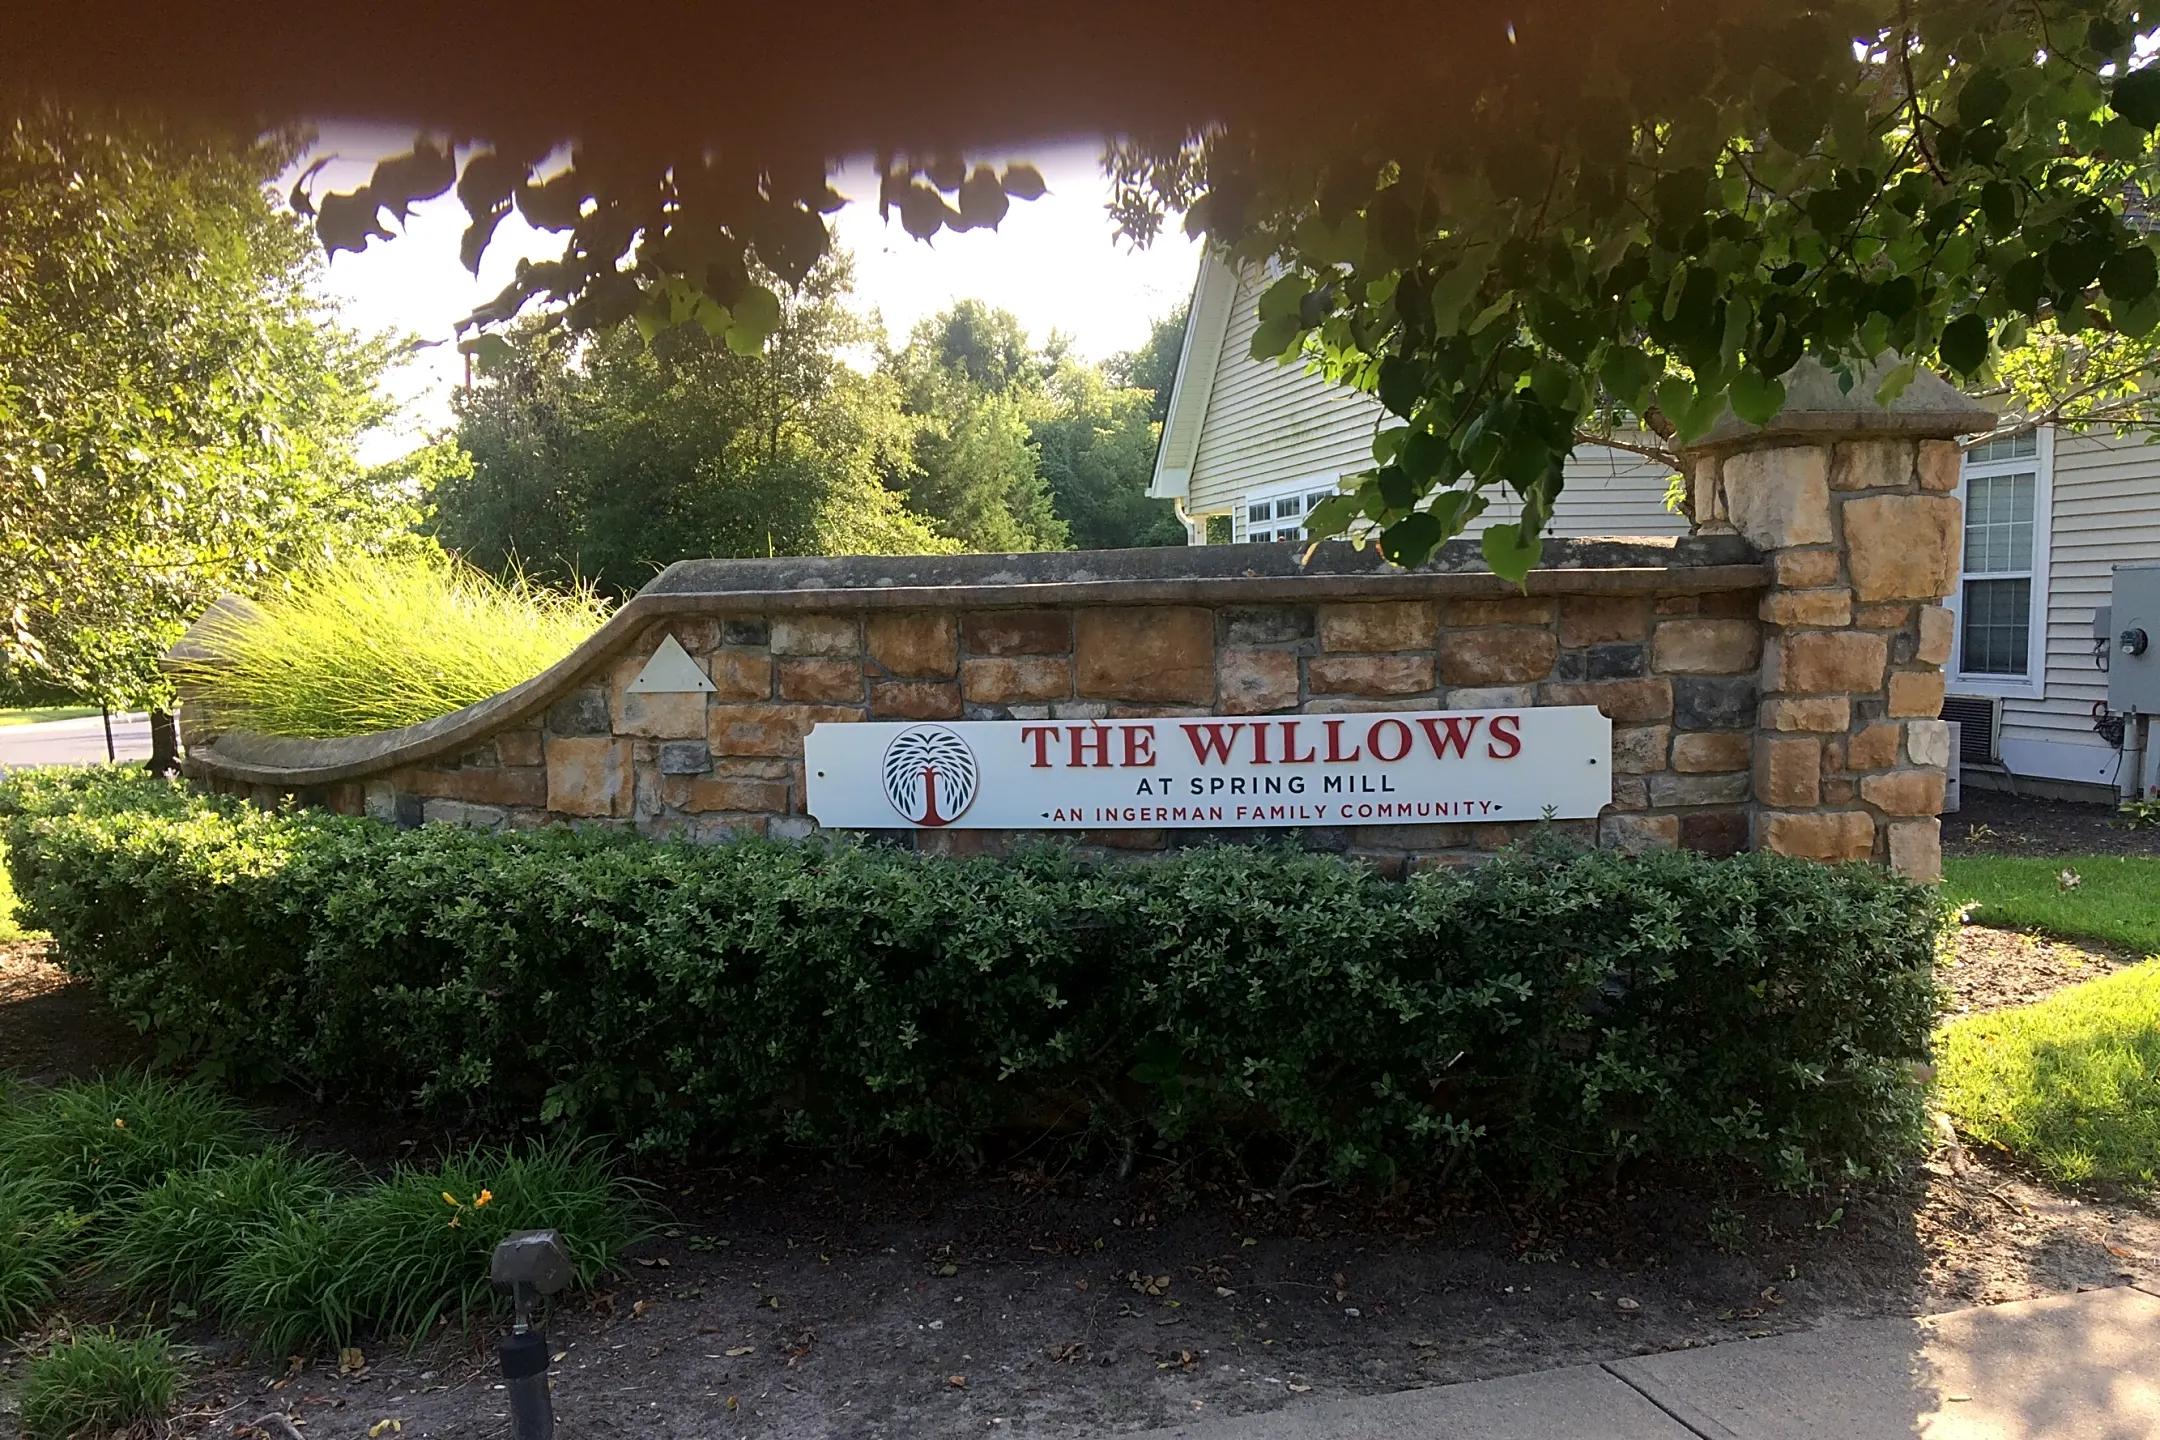 Pool - The Willows At Spring Mill - Mullica Hill, NJ